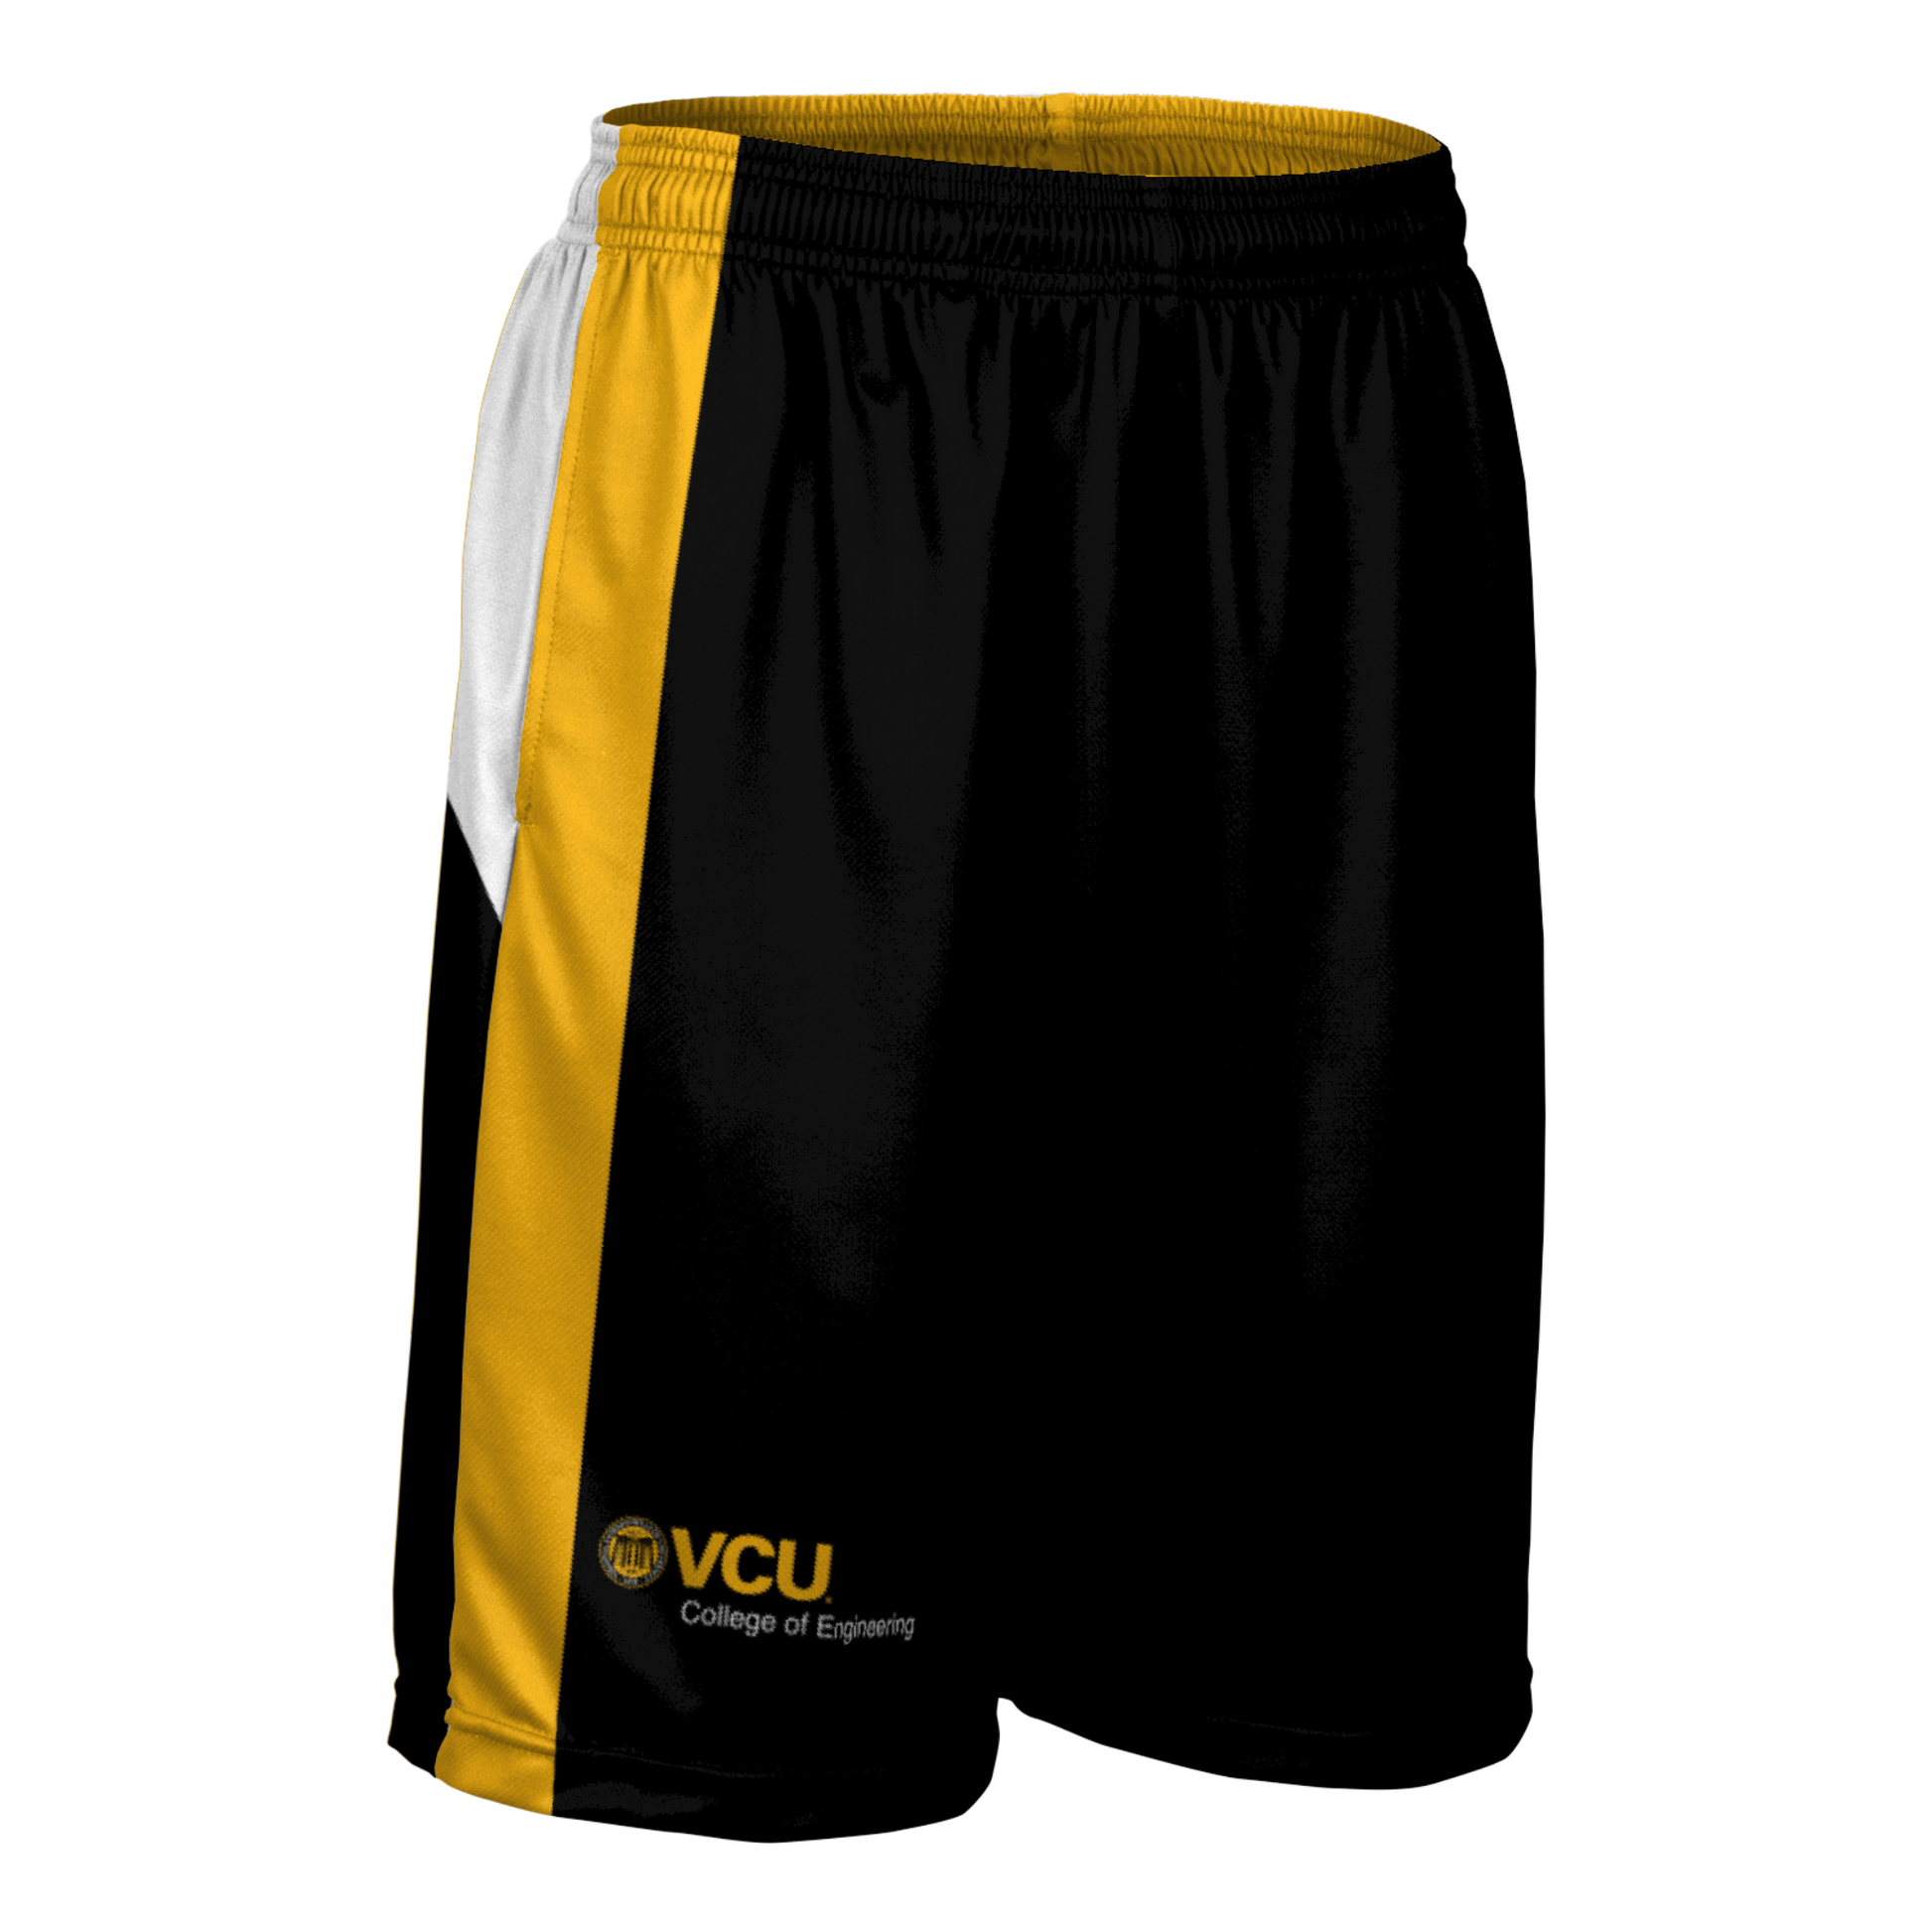 VCU College of Engineering Shorts - Virginia Book Company